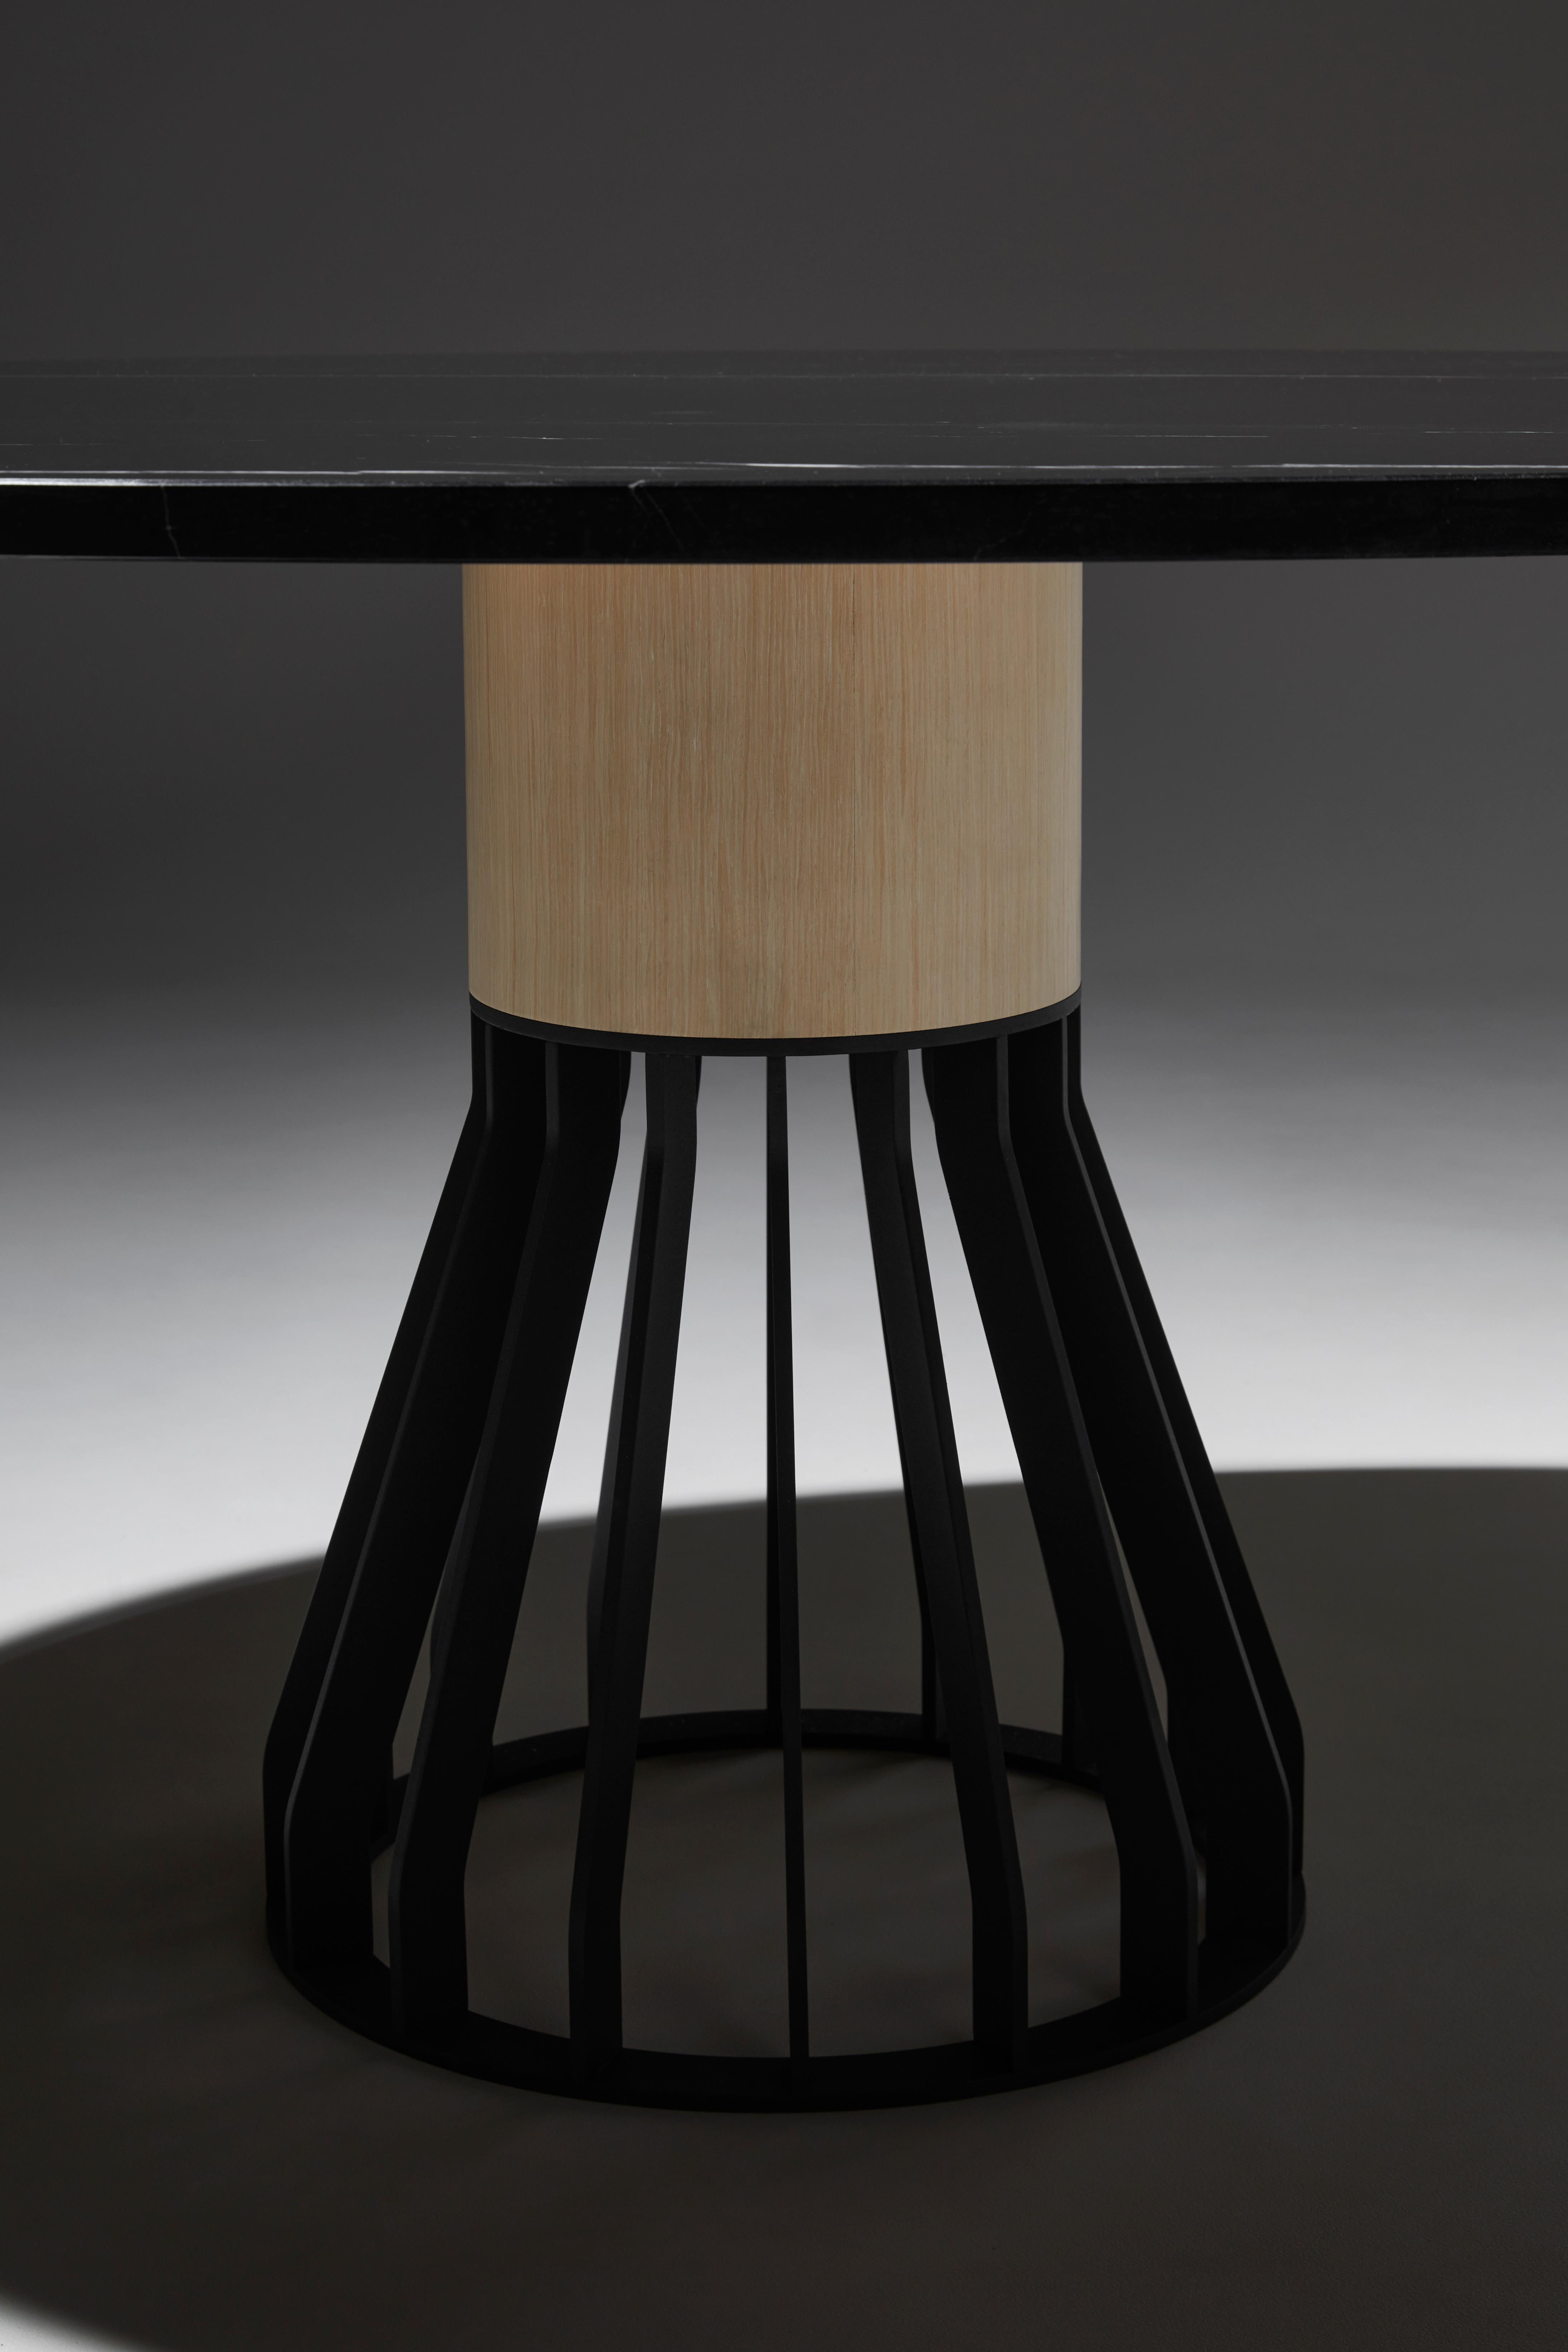 French Mewoma Dining Table, Black Legs White Top by Jonah Takagi for La Chance For Sale